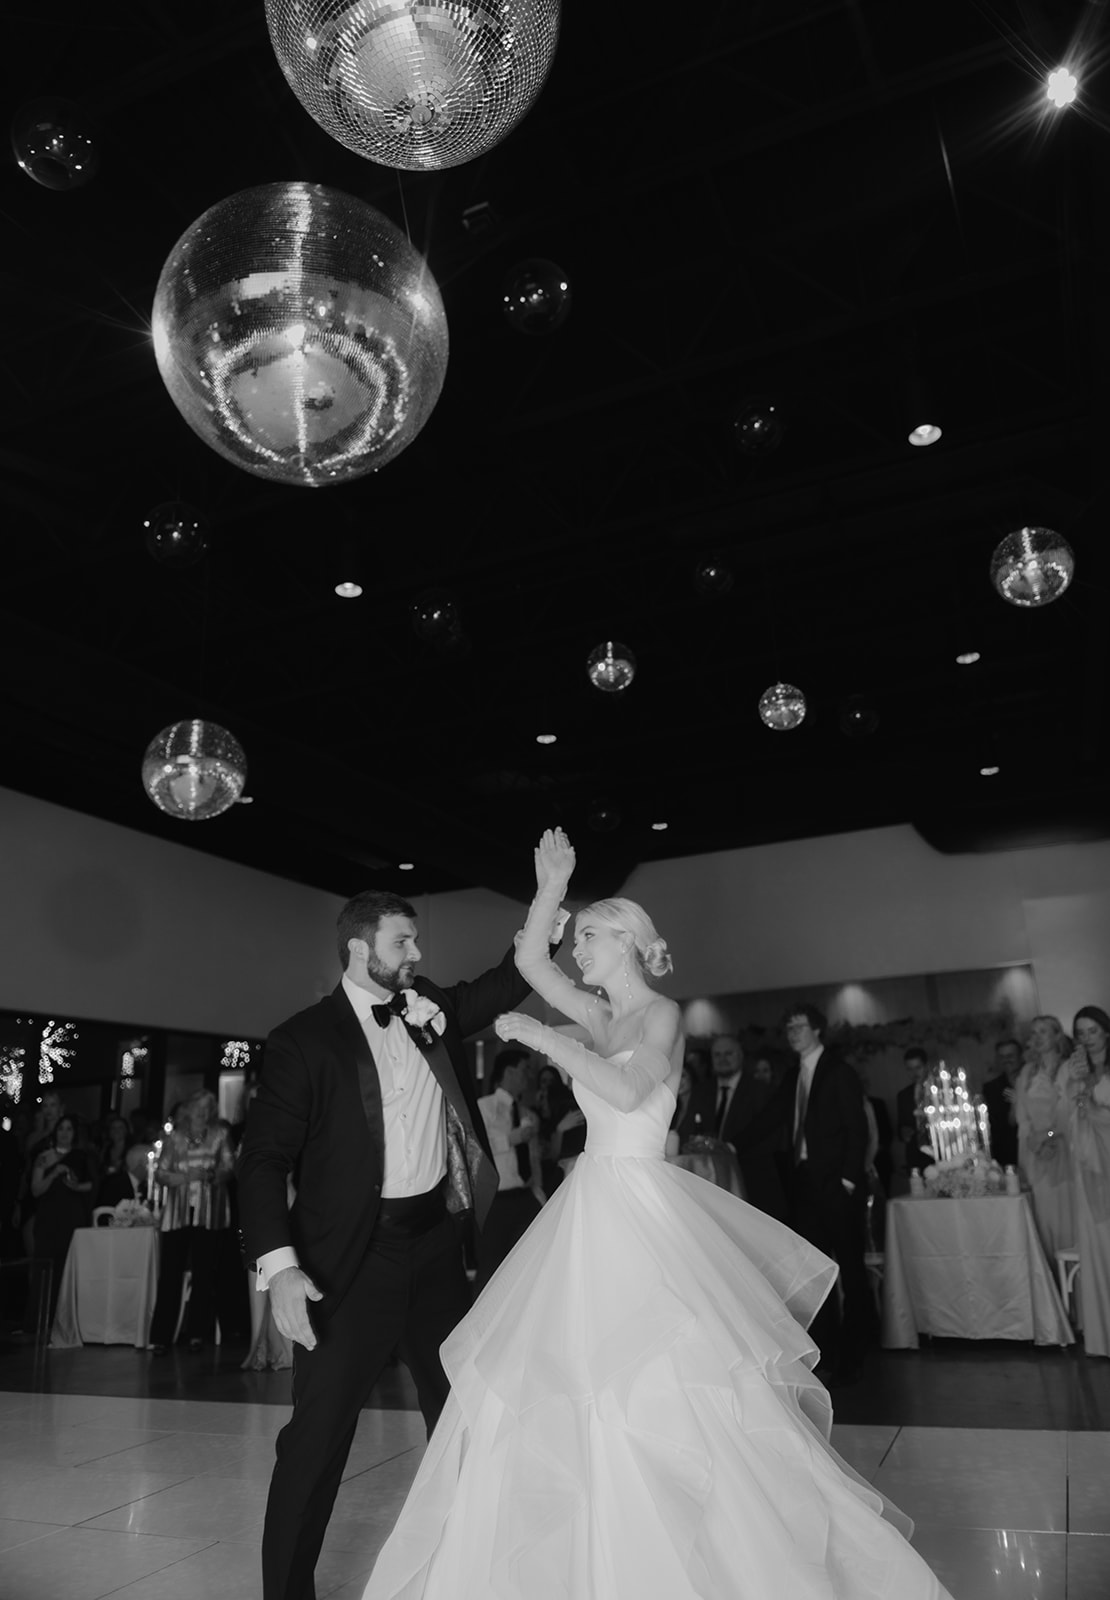 A New Year's Eve wedding with a disco ball installation.